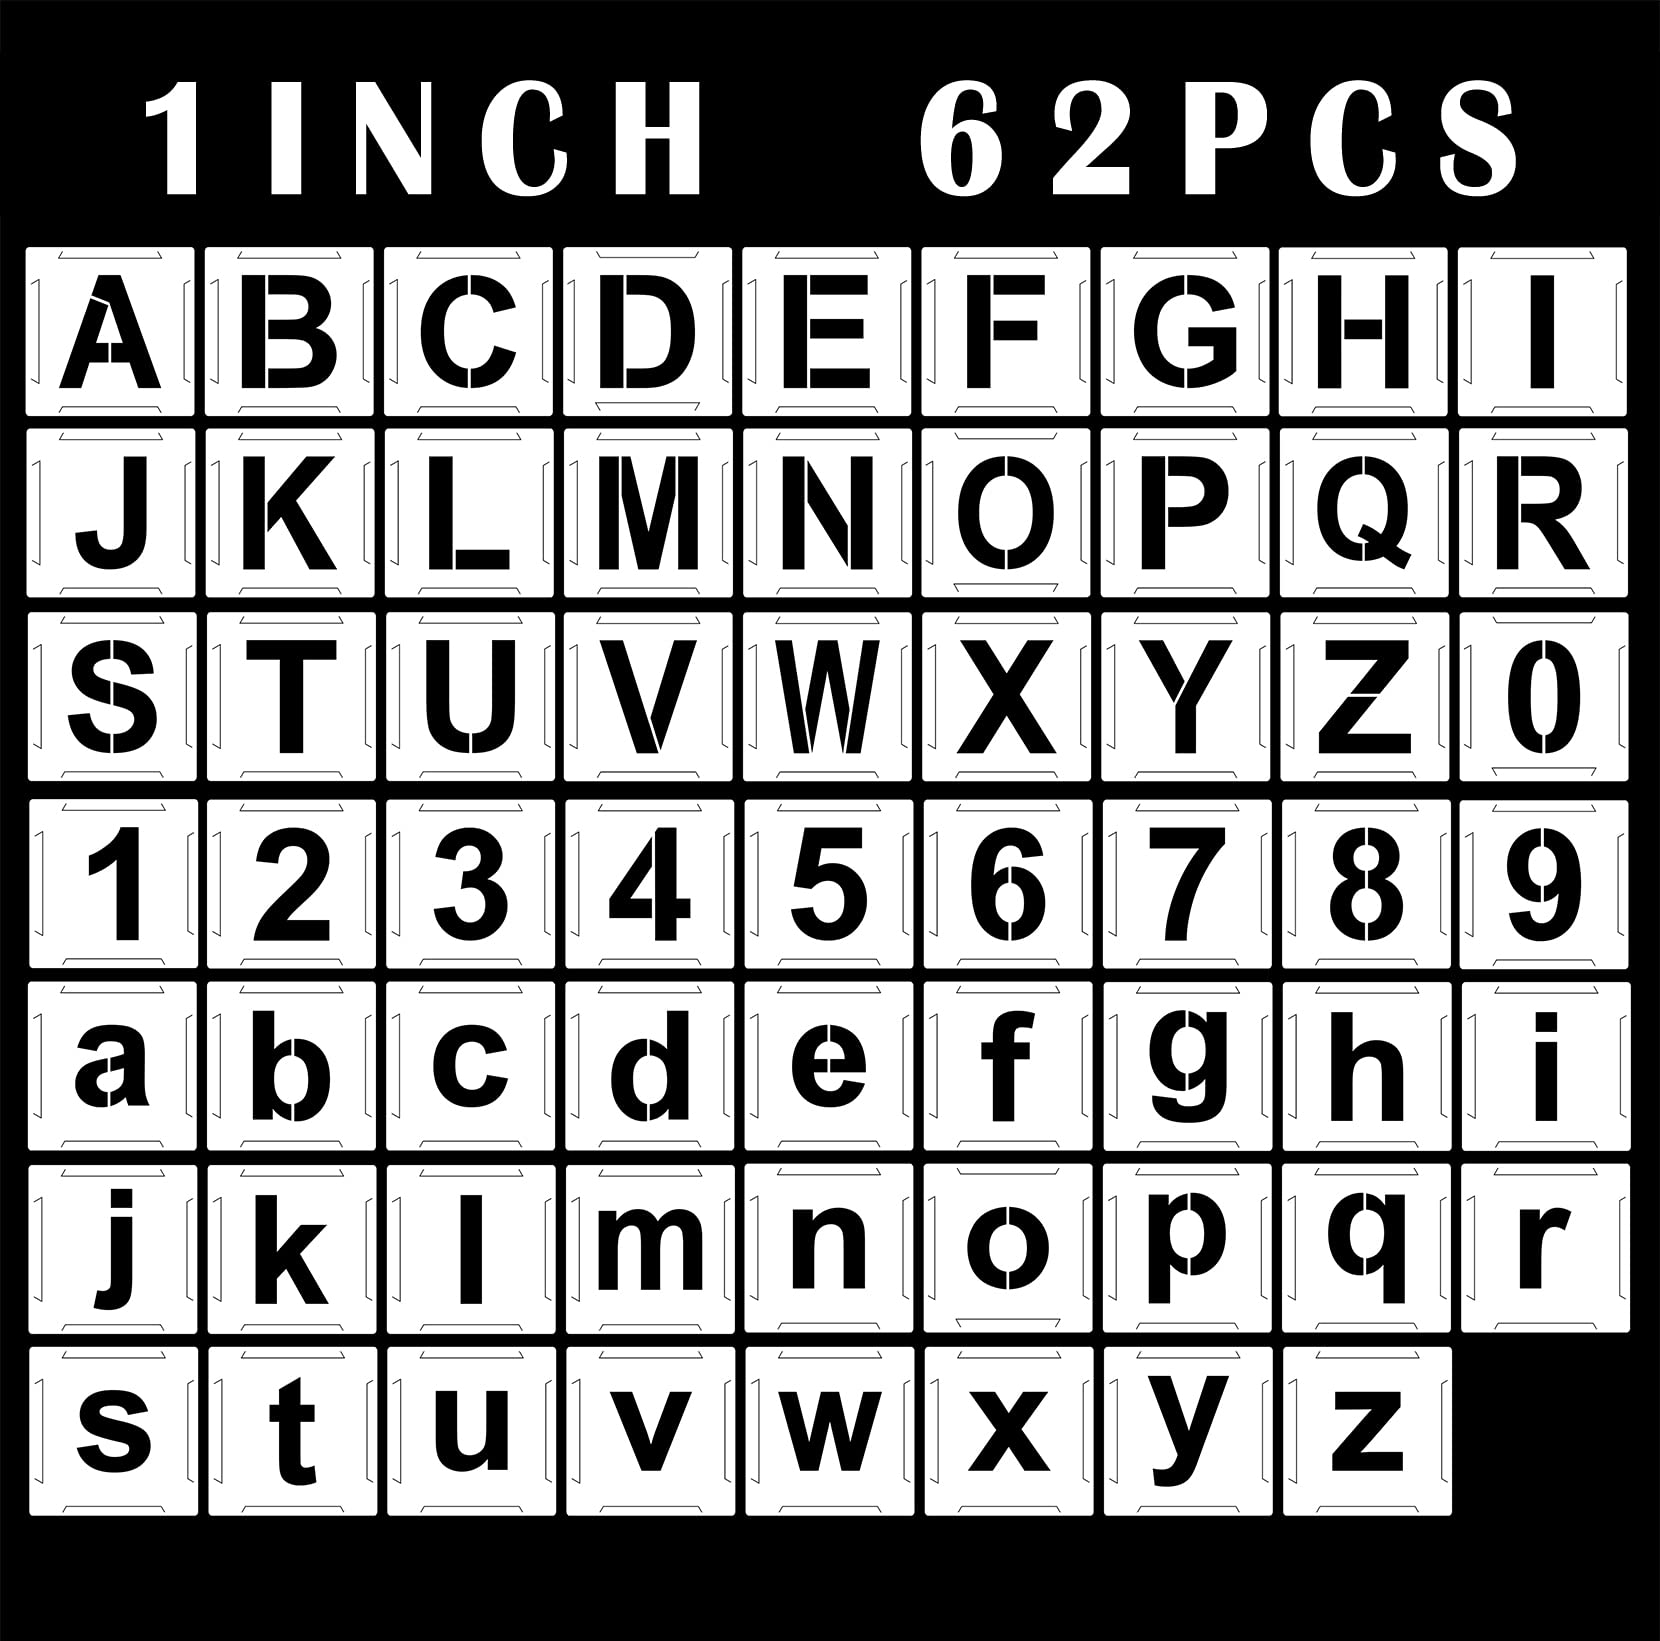 Mossdecal 62pcs Letter Stencils and Numbers 1 Inch, Small Reusable